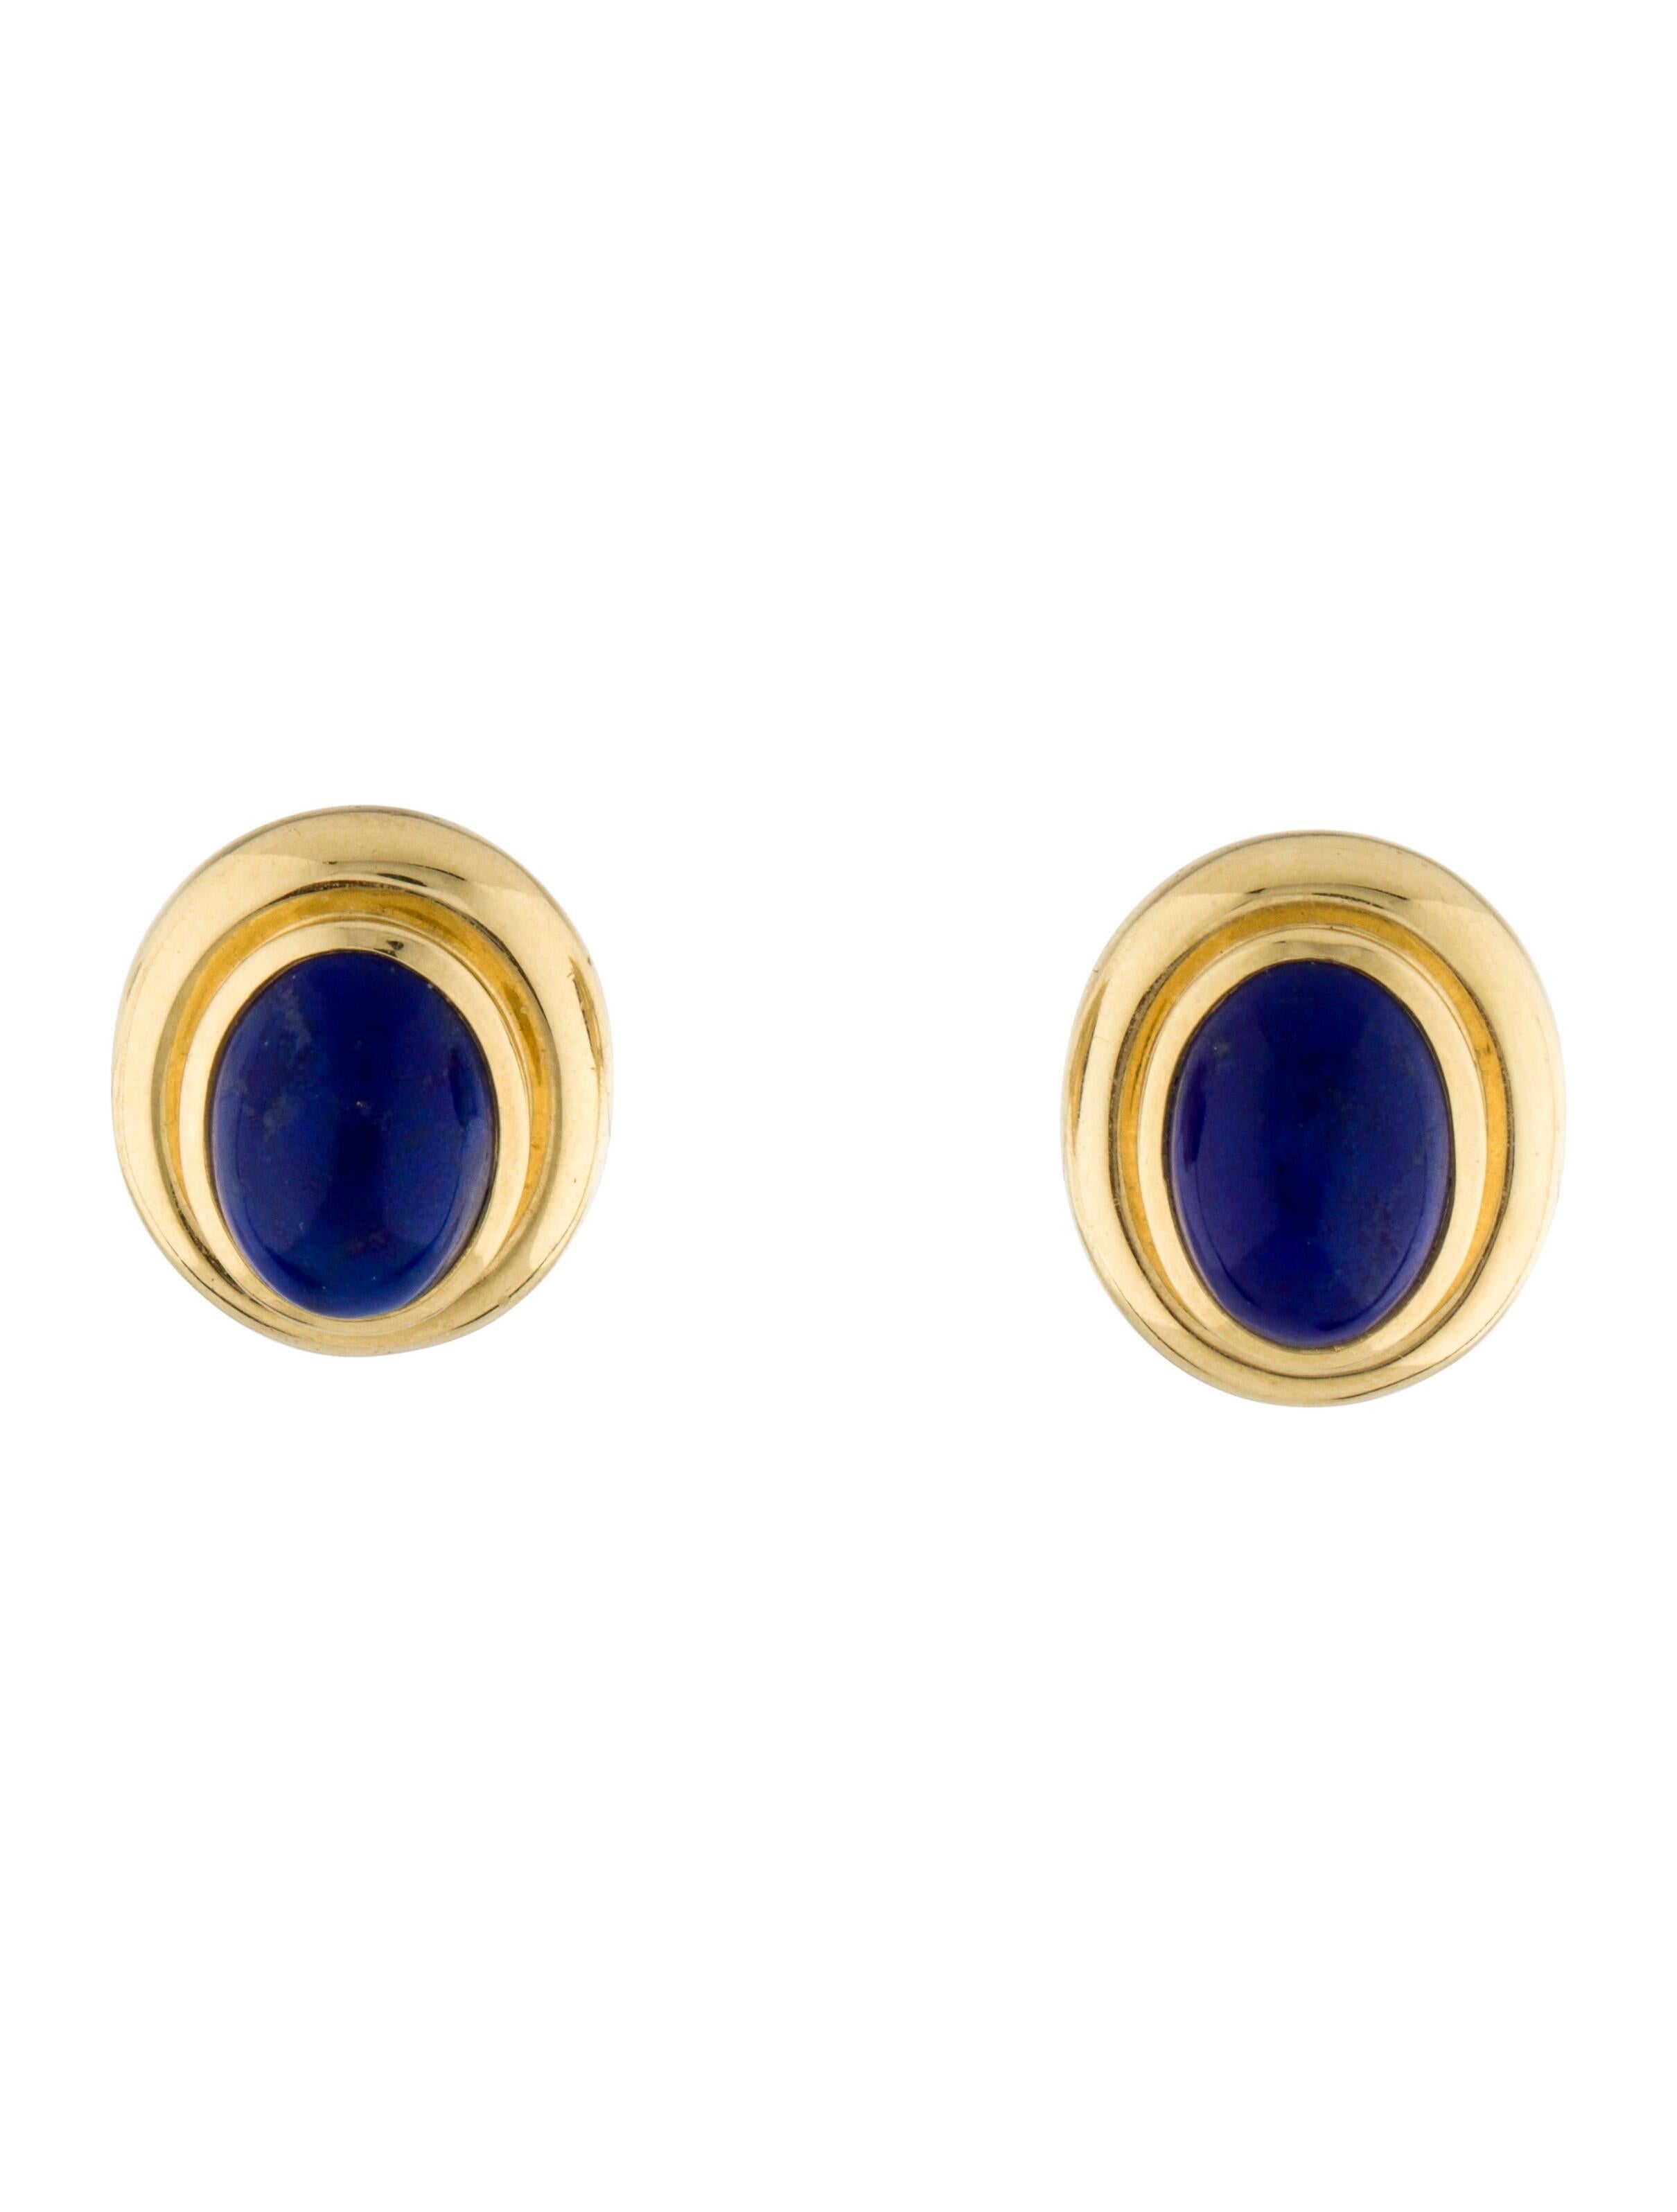 Women's or Men's Tiffany & Co. Paloma Picasso 18k Yellow Gold & Lapis Earrings circa 1988 Vintage For Sale